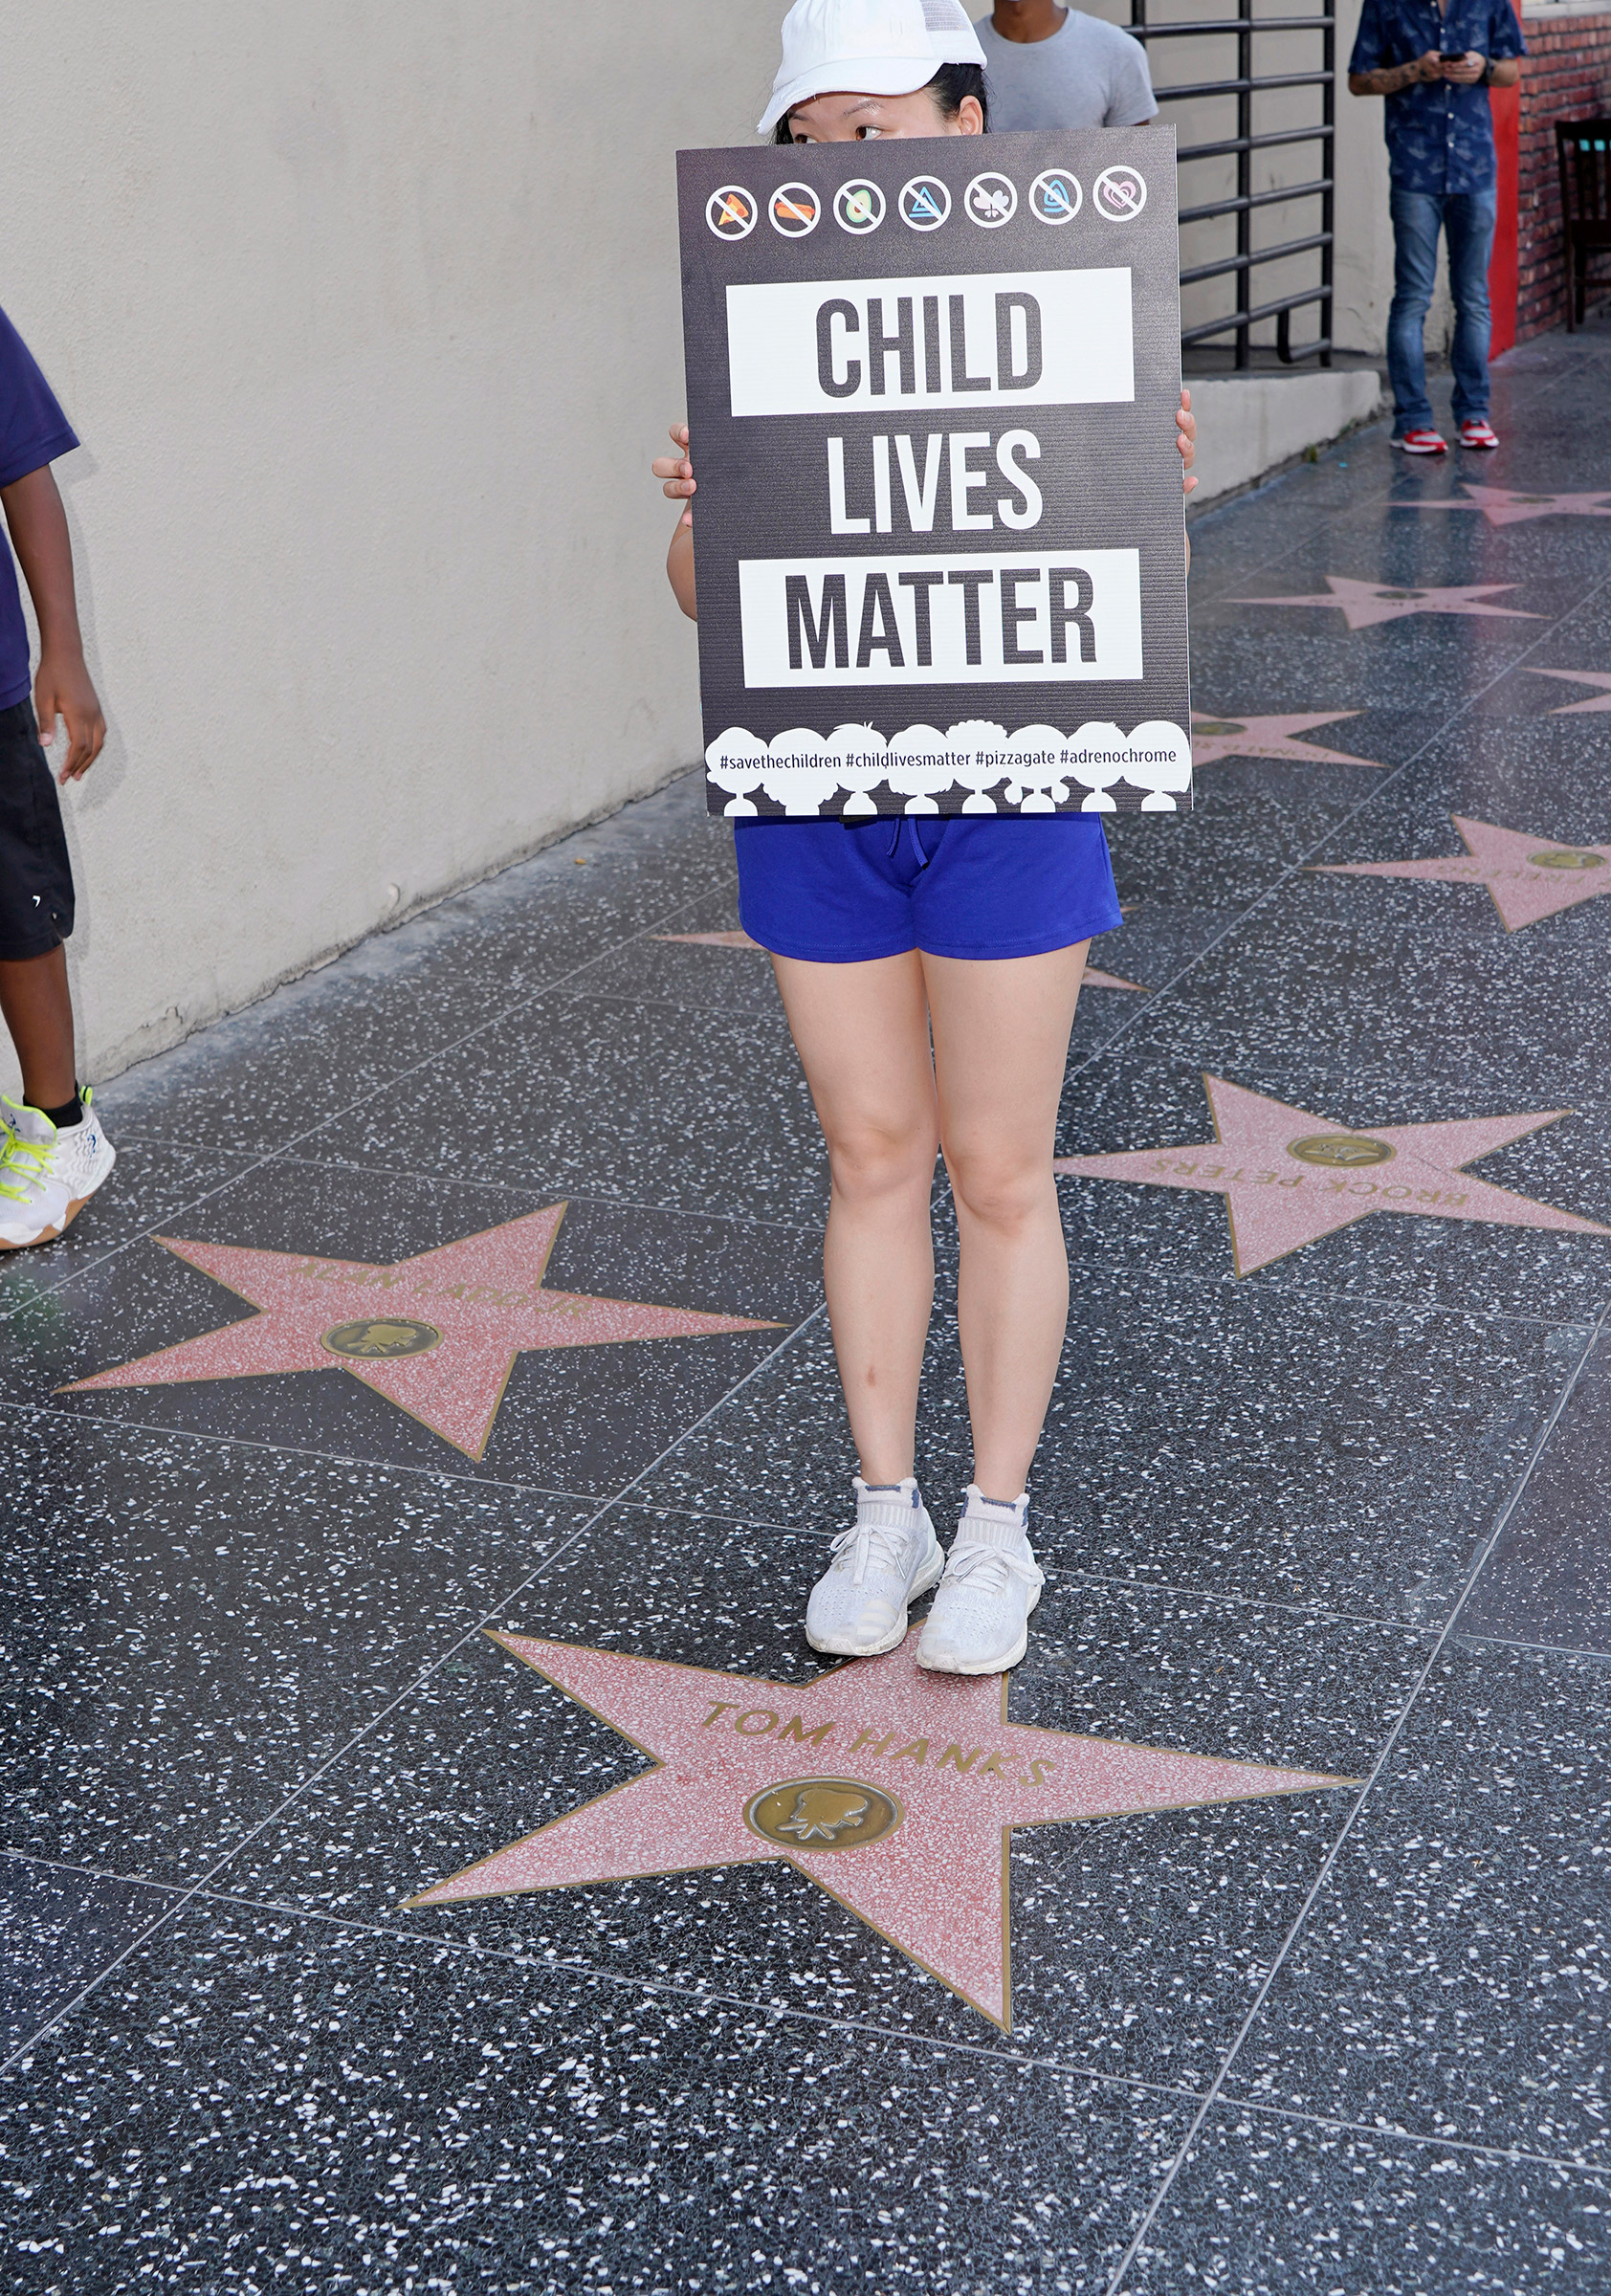 A protester stands on Tom Hanks' star on the Hollywood Walk of Fame, Aug. 22, 2020. (Jamie Lee Curtis Taete)